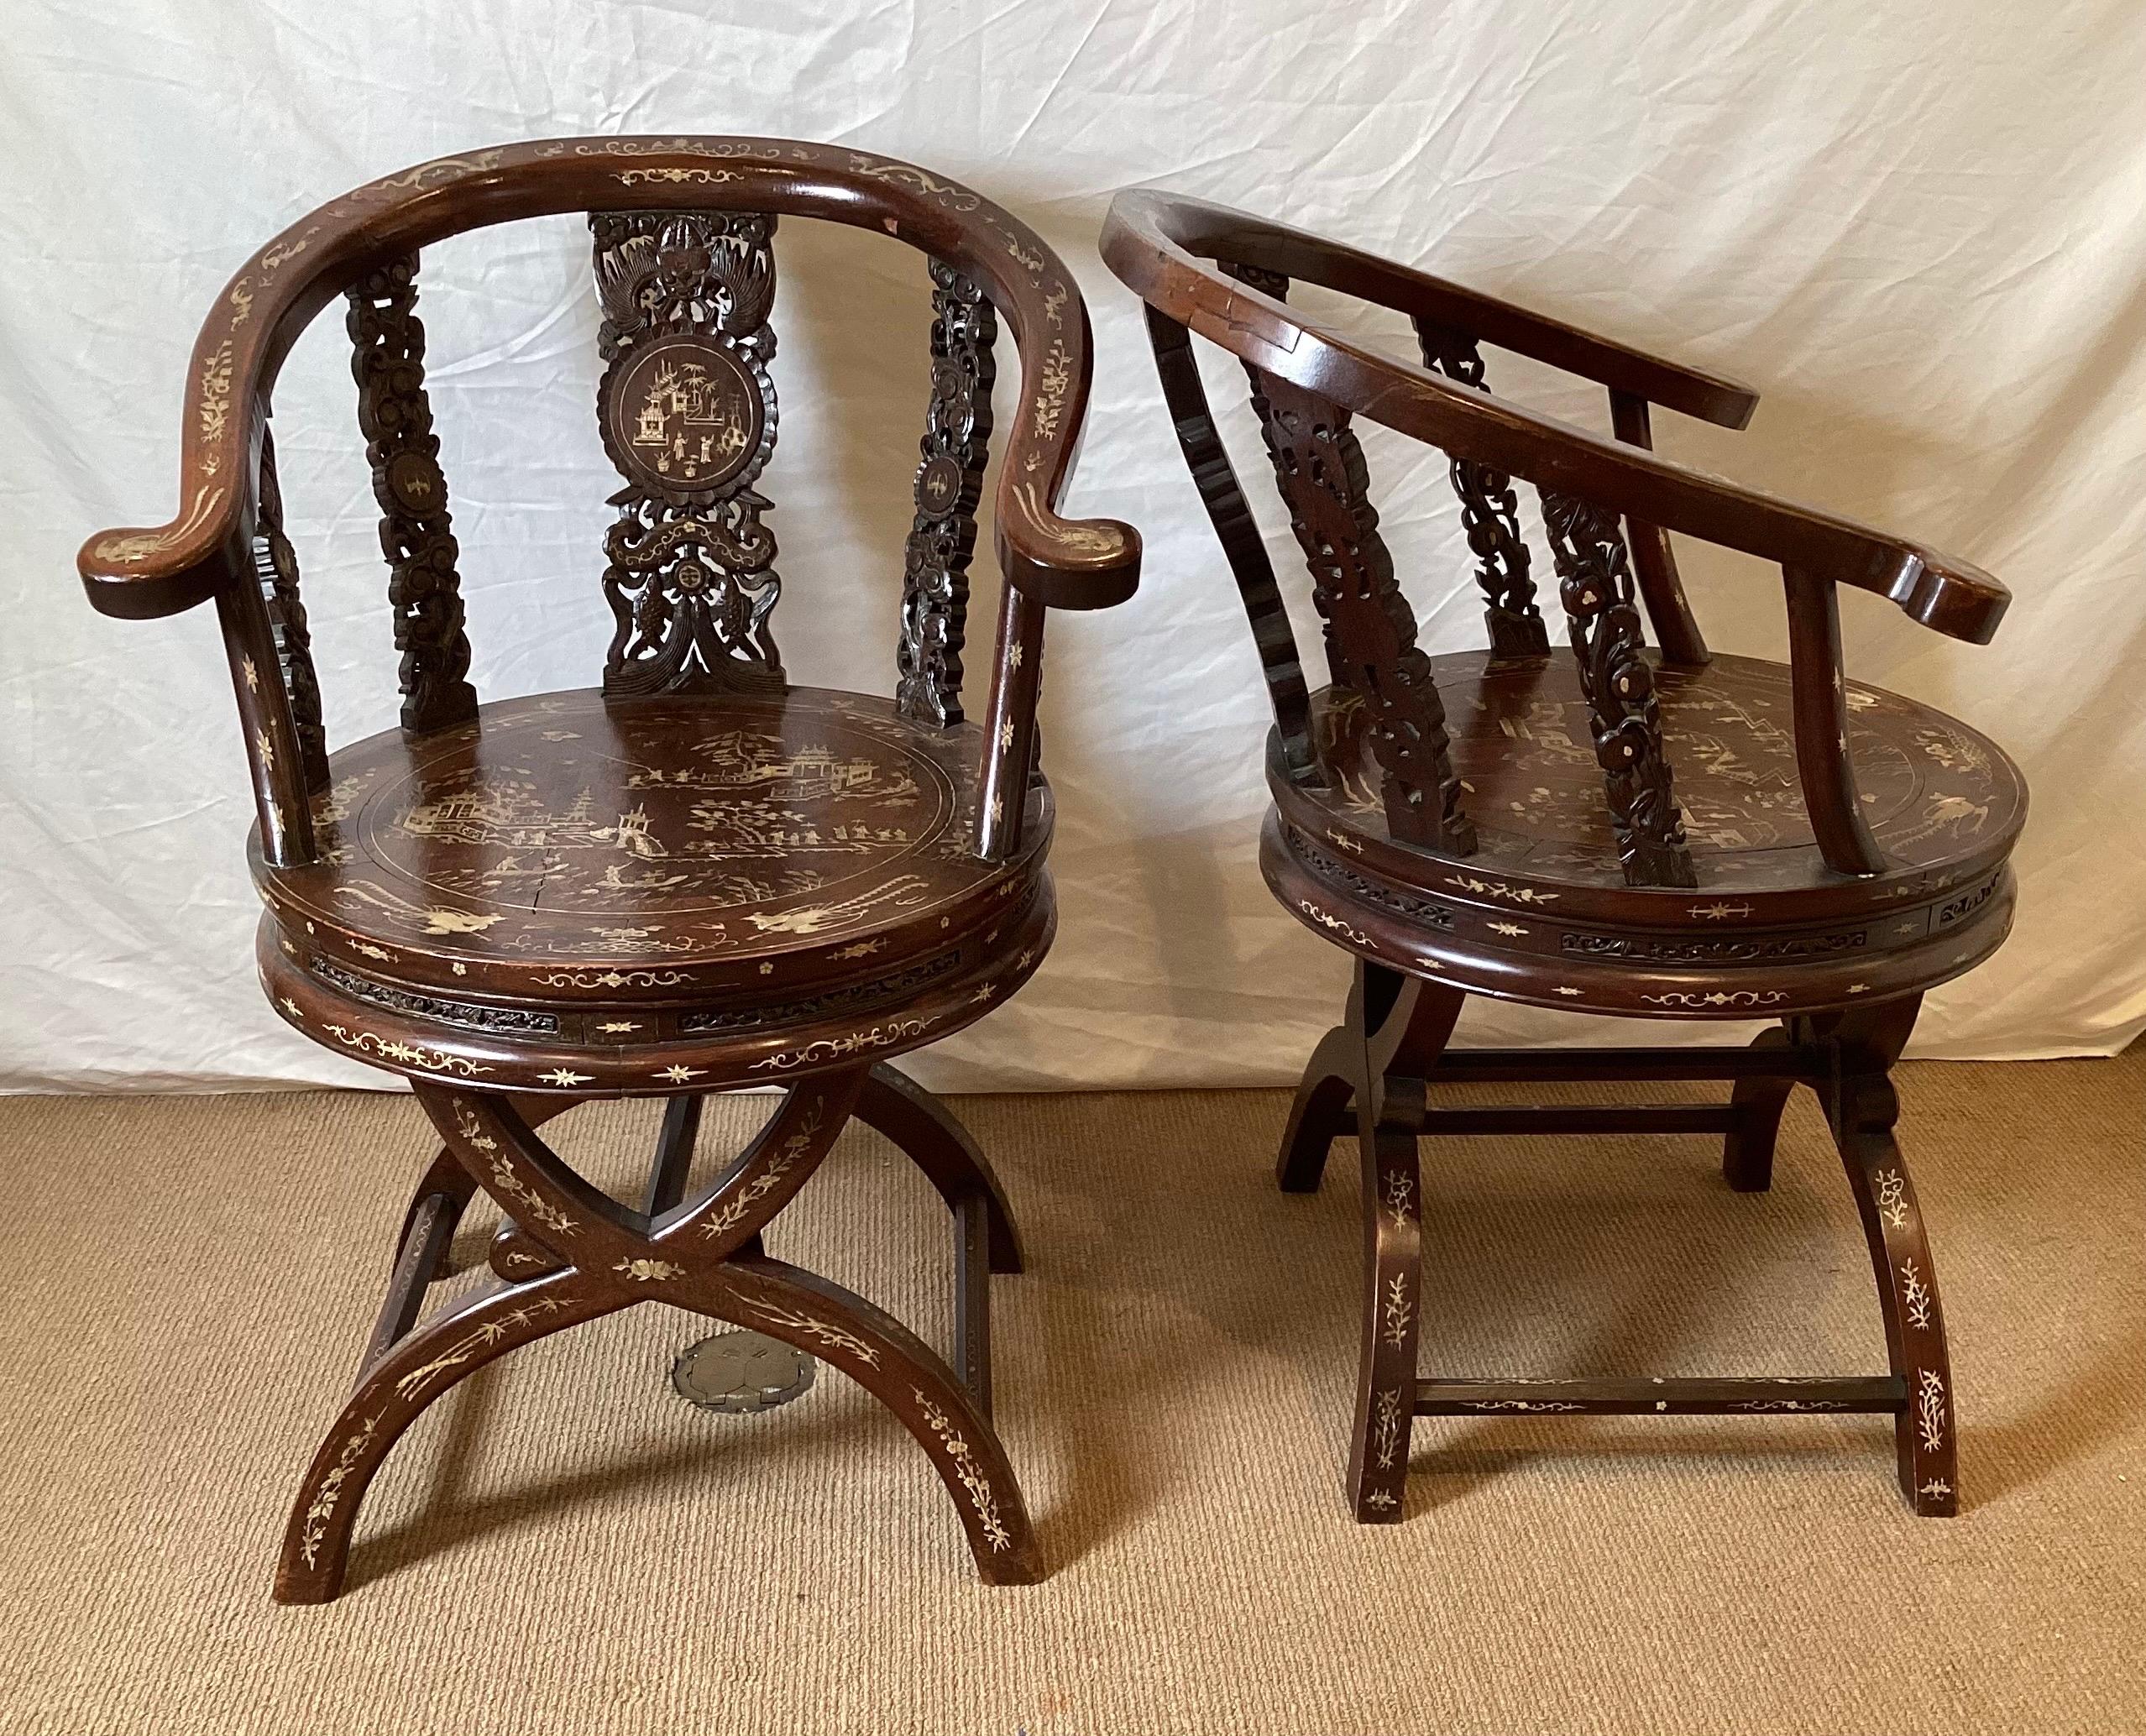 Chinoiserie Circa 1890-1900 Hand Carved and Inlaid Asian Arm Chairs Depicting a Village For Sale